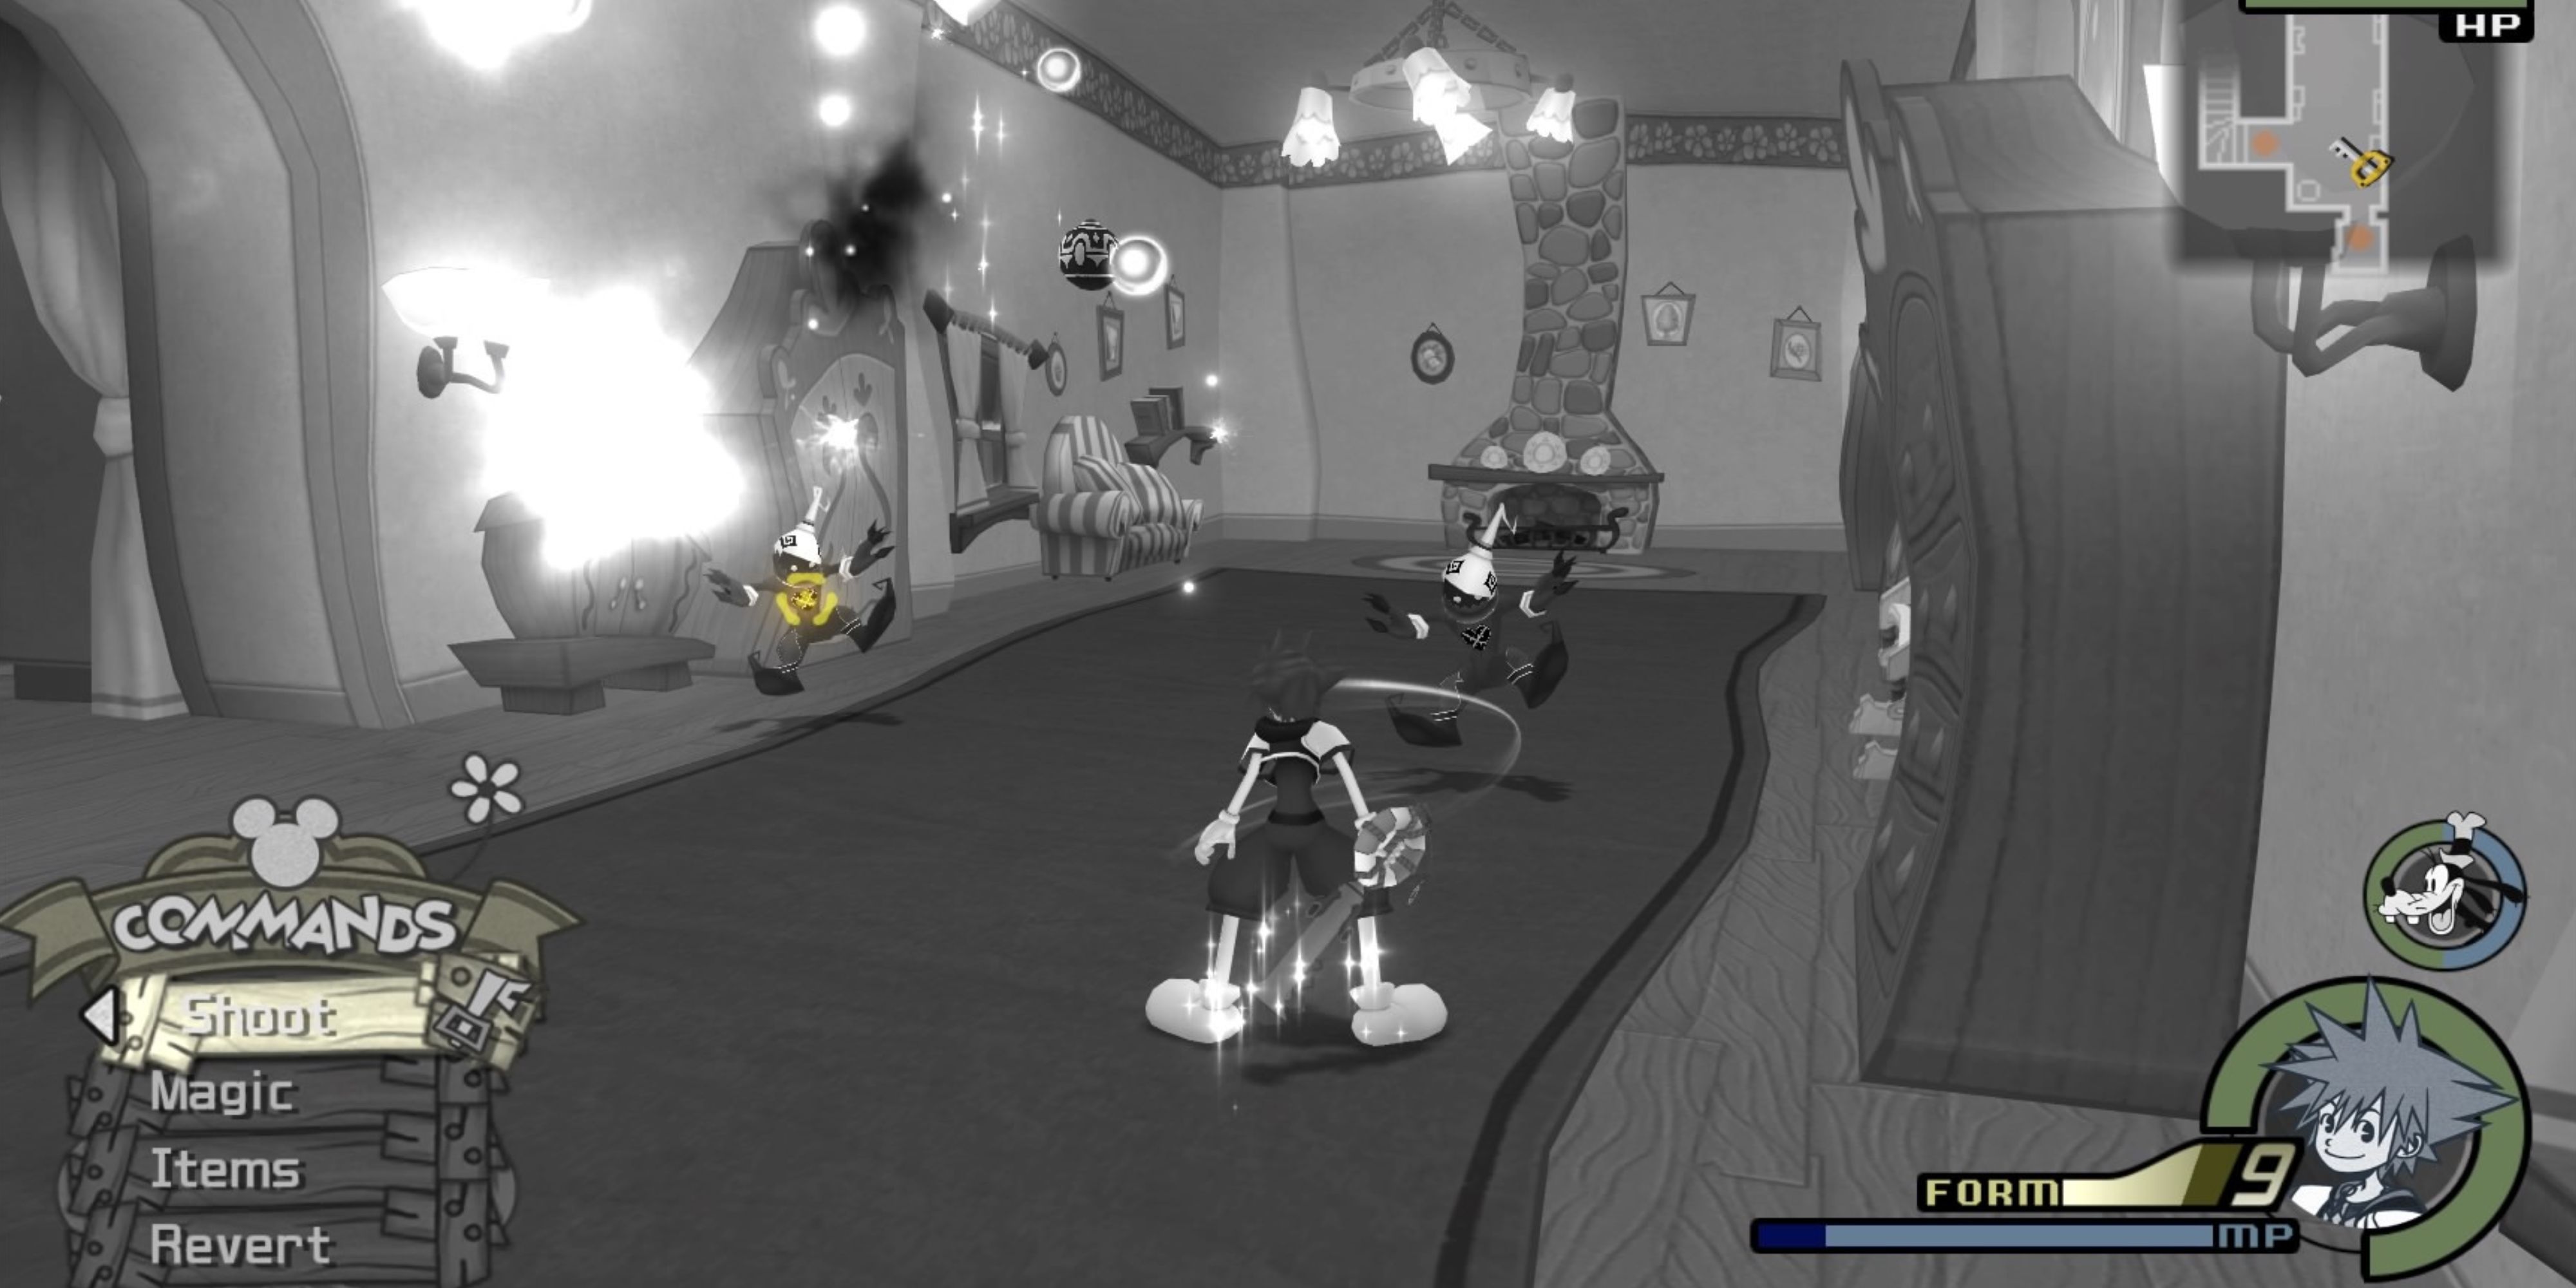 Sora using Wisdom Form to defeat a bunch of Heartless in Mickey's House.